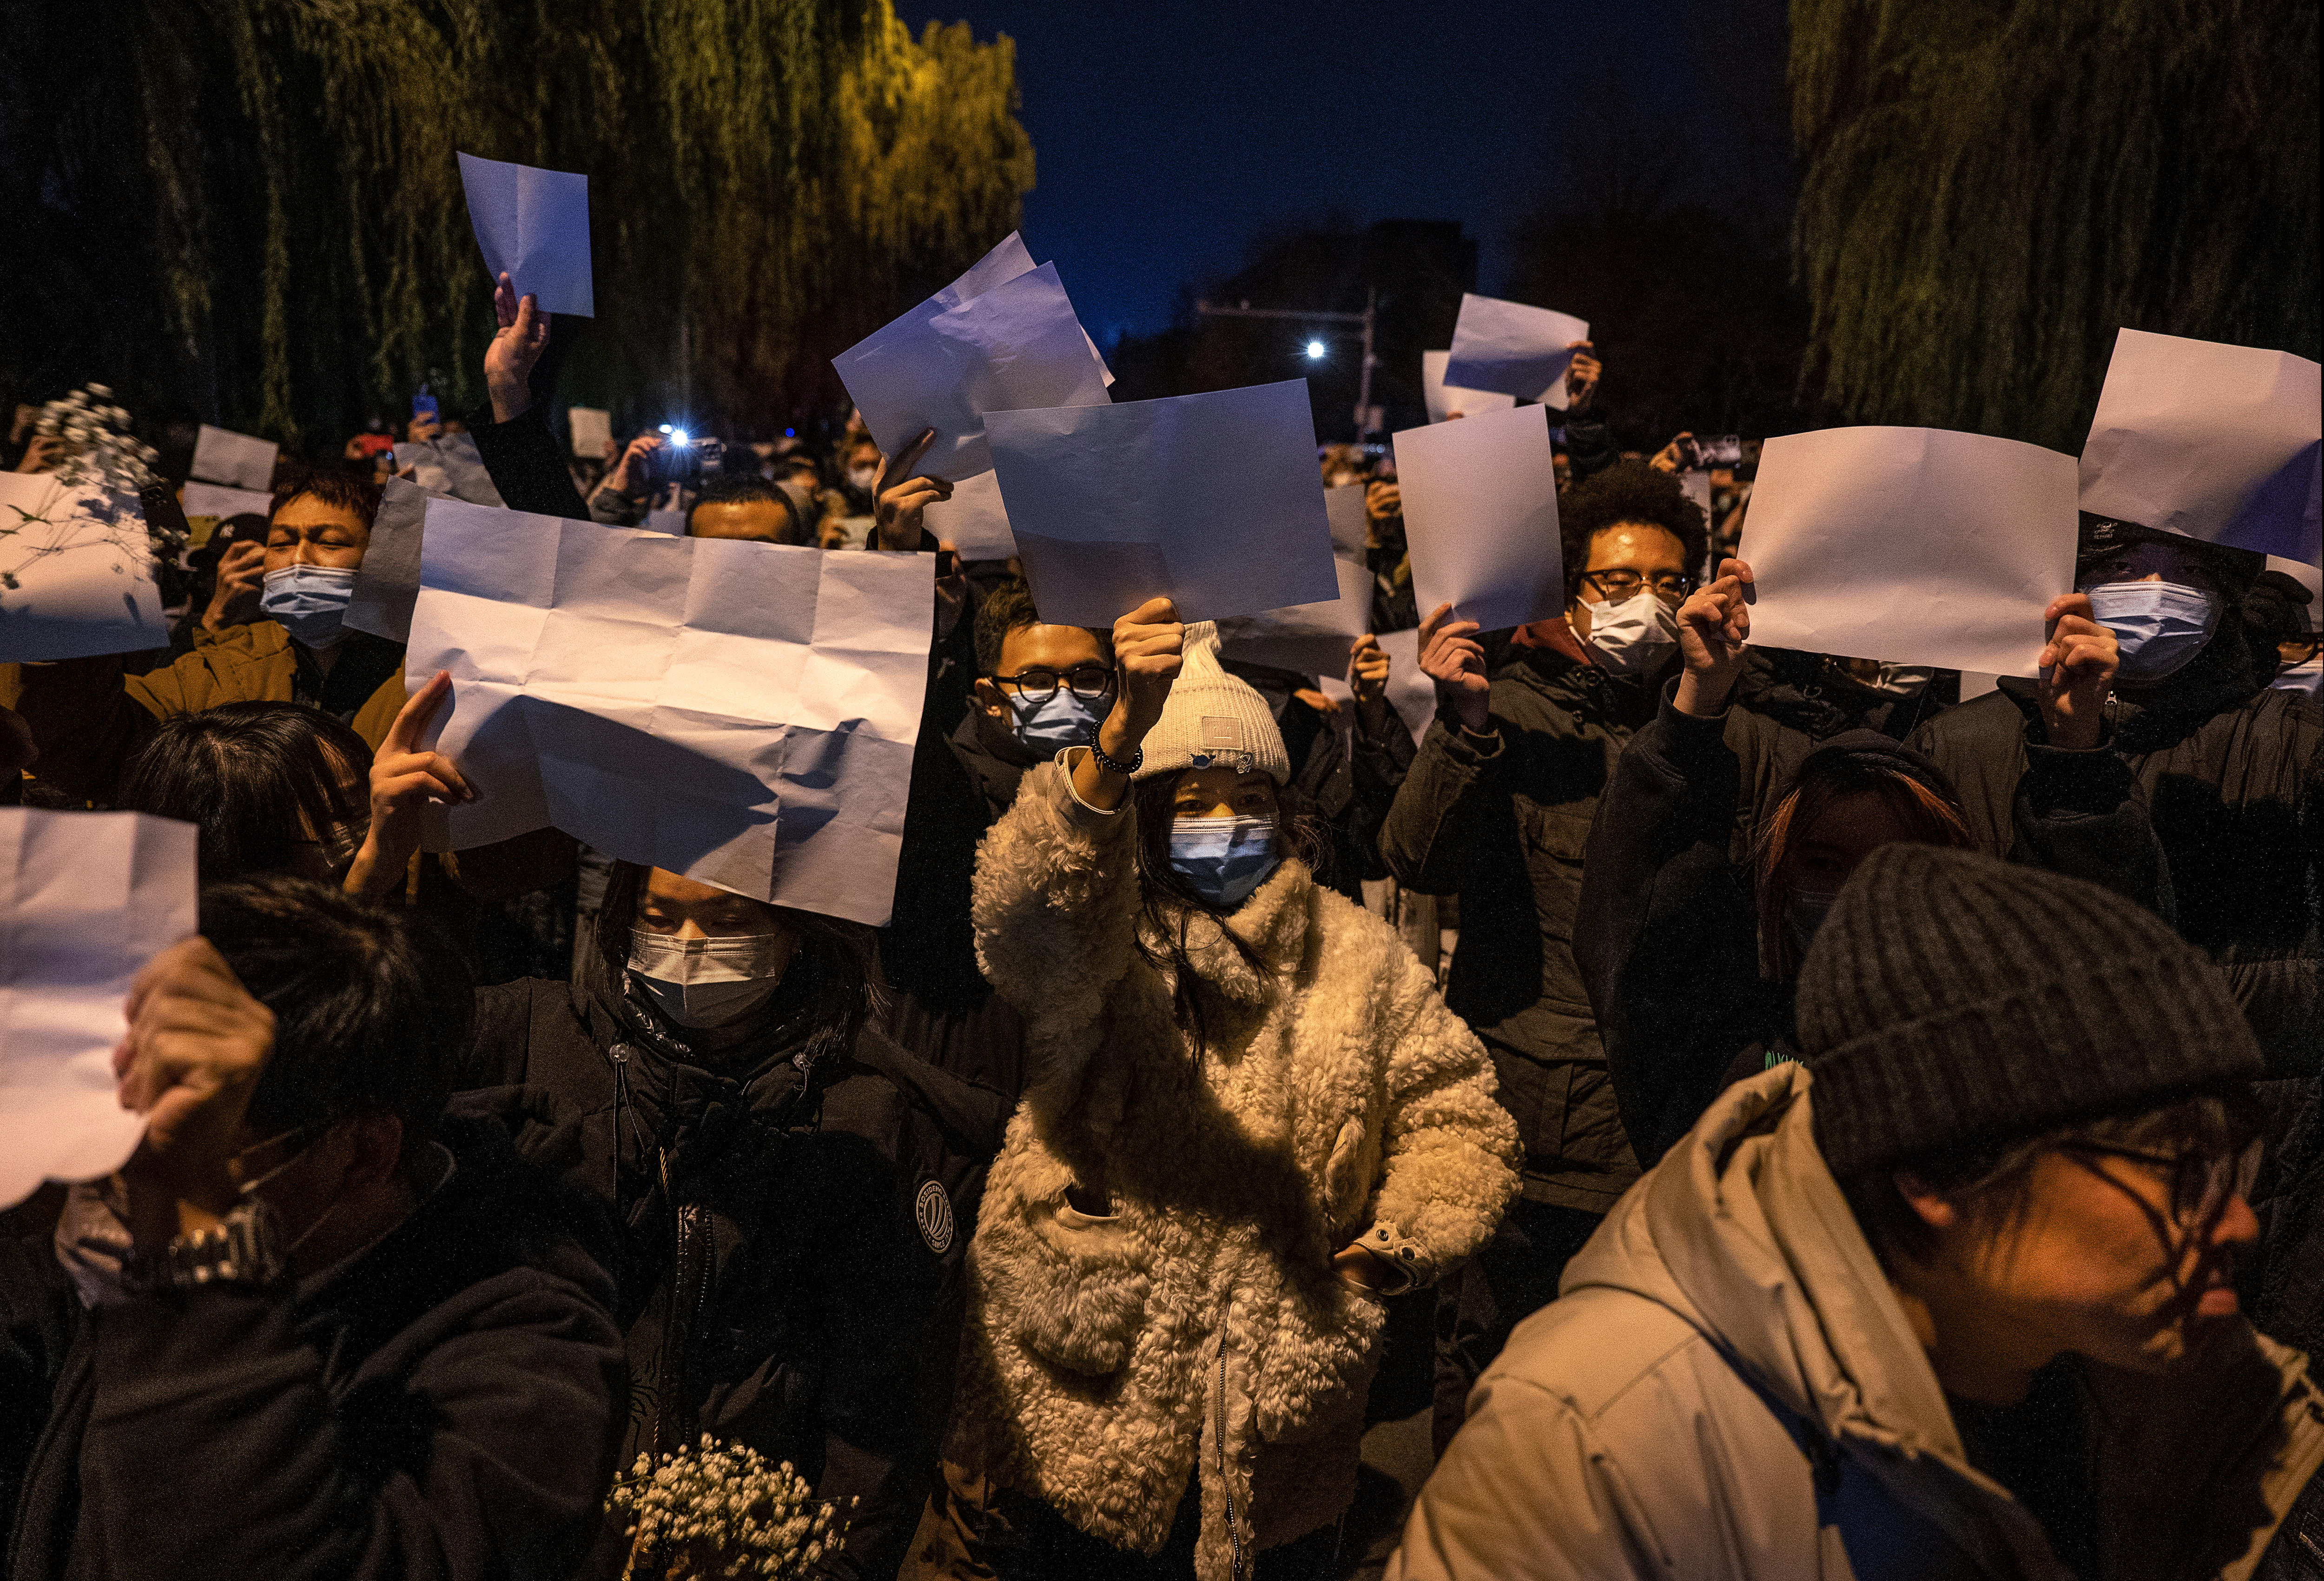 Protests in China are about more than COVID restrictions